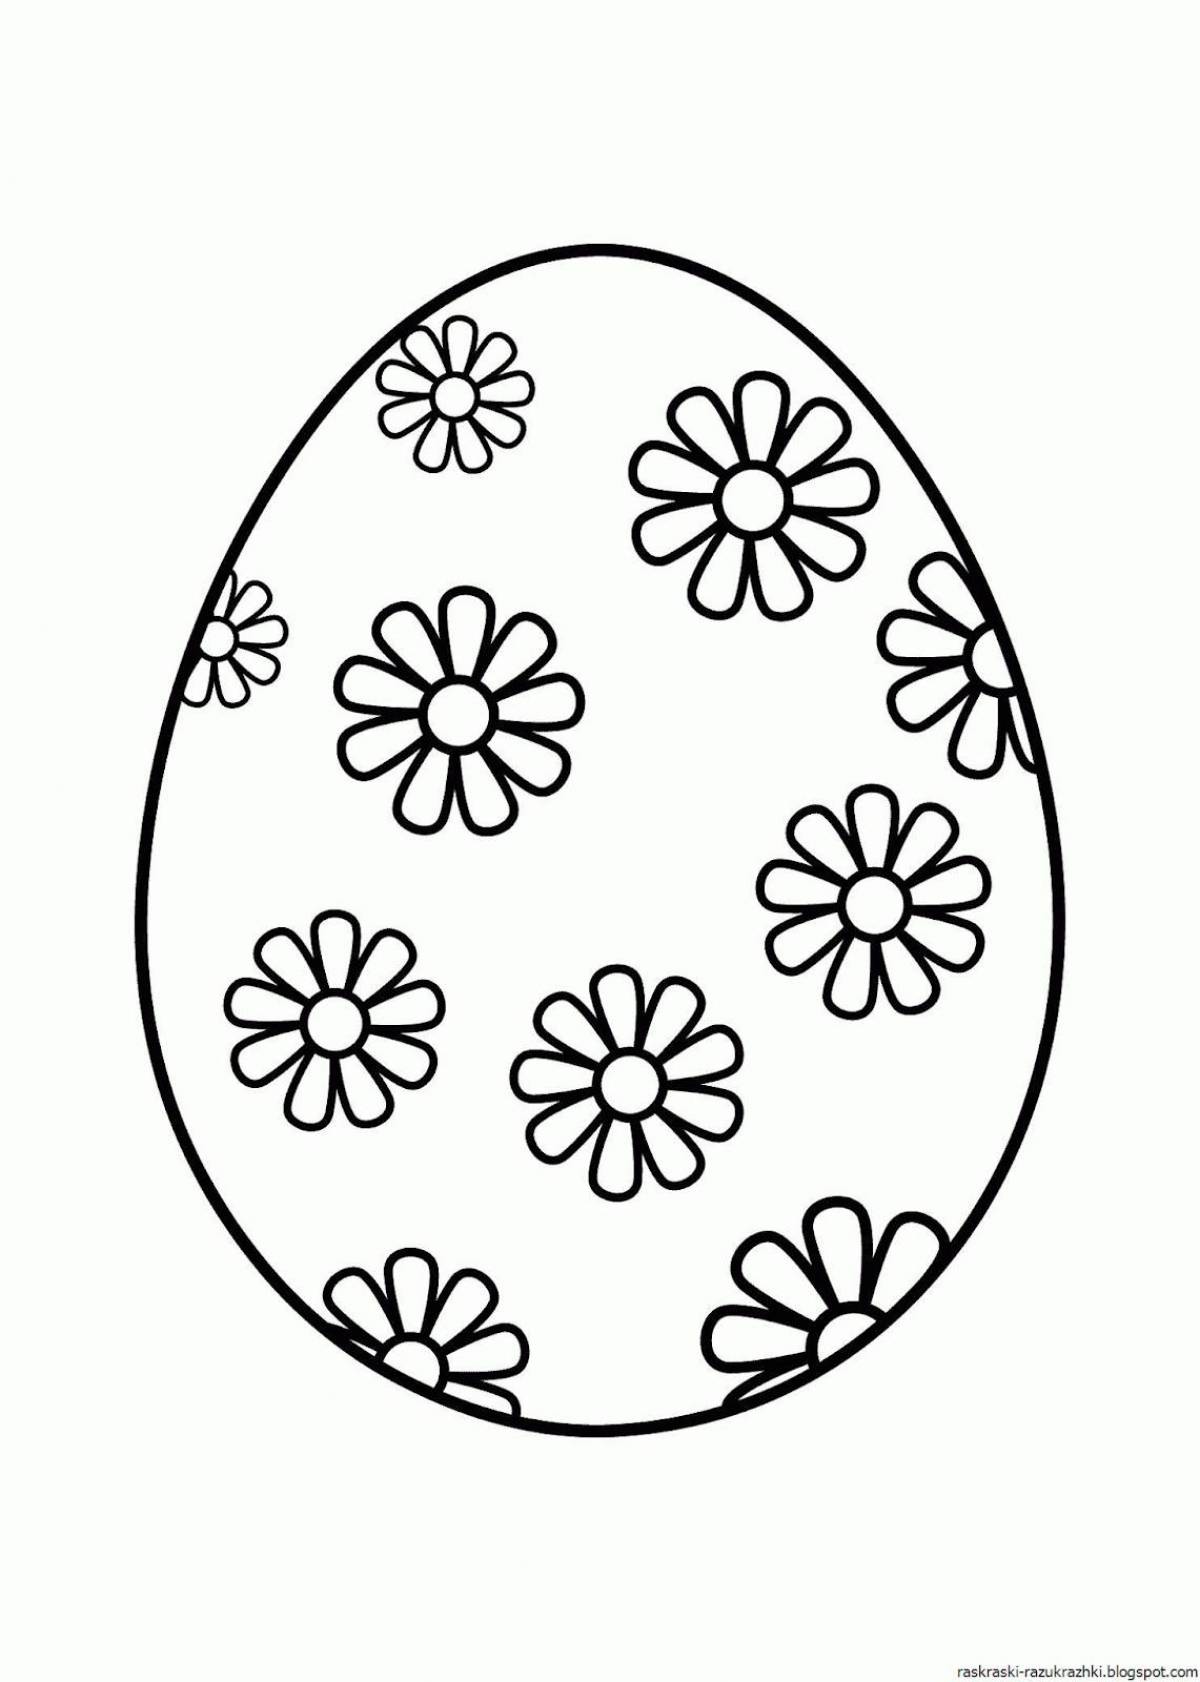 Glowing easter egg coloring page